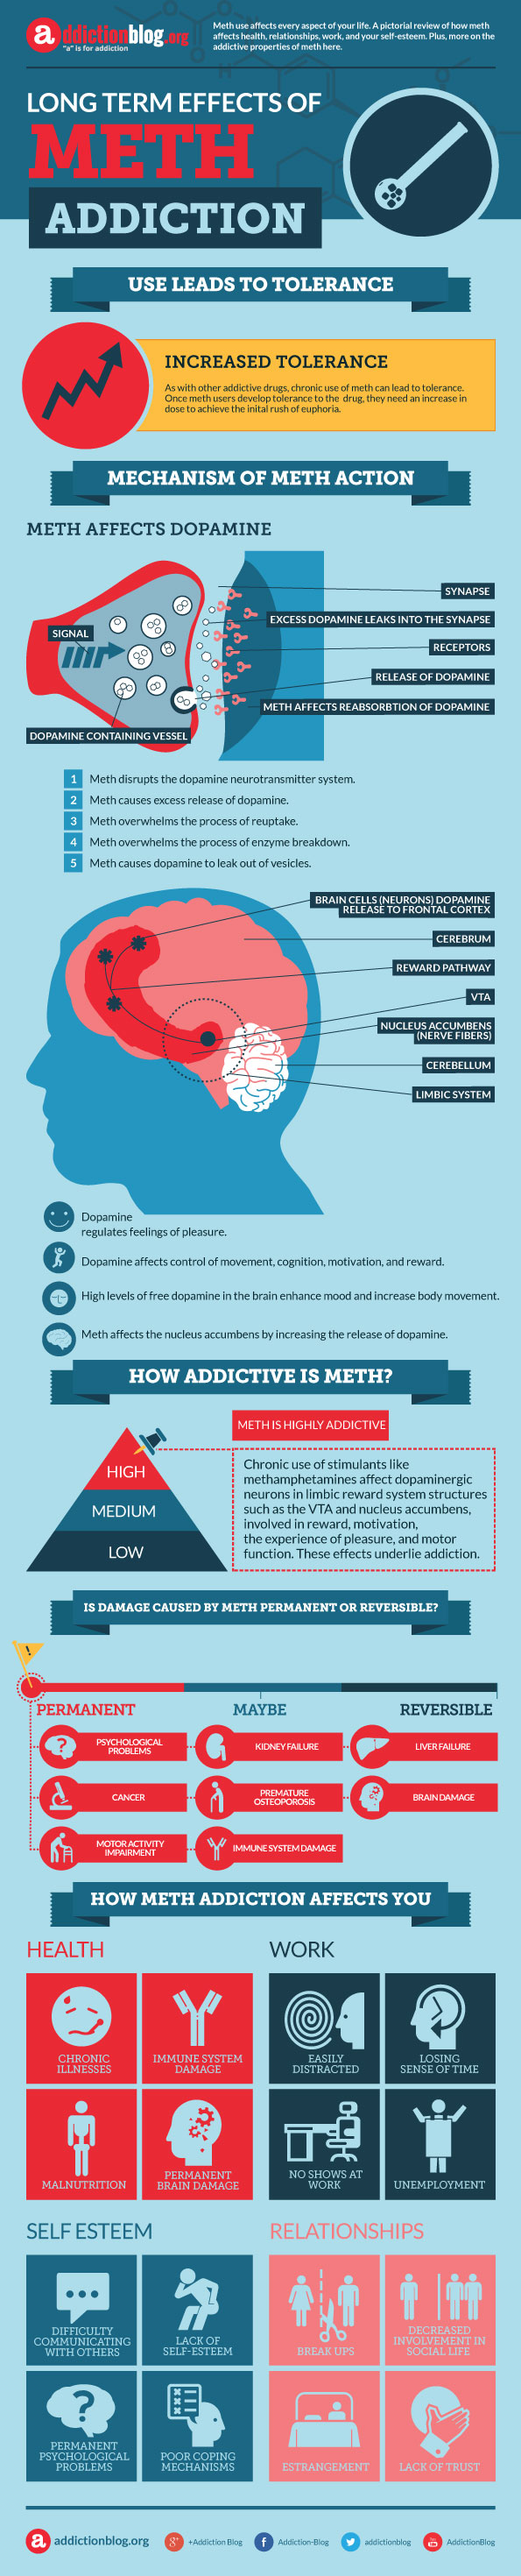 Long term effects of meth addiction (INFOGRAPHIC)